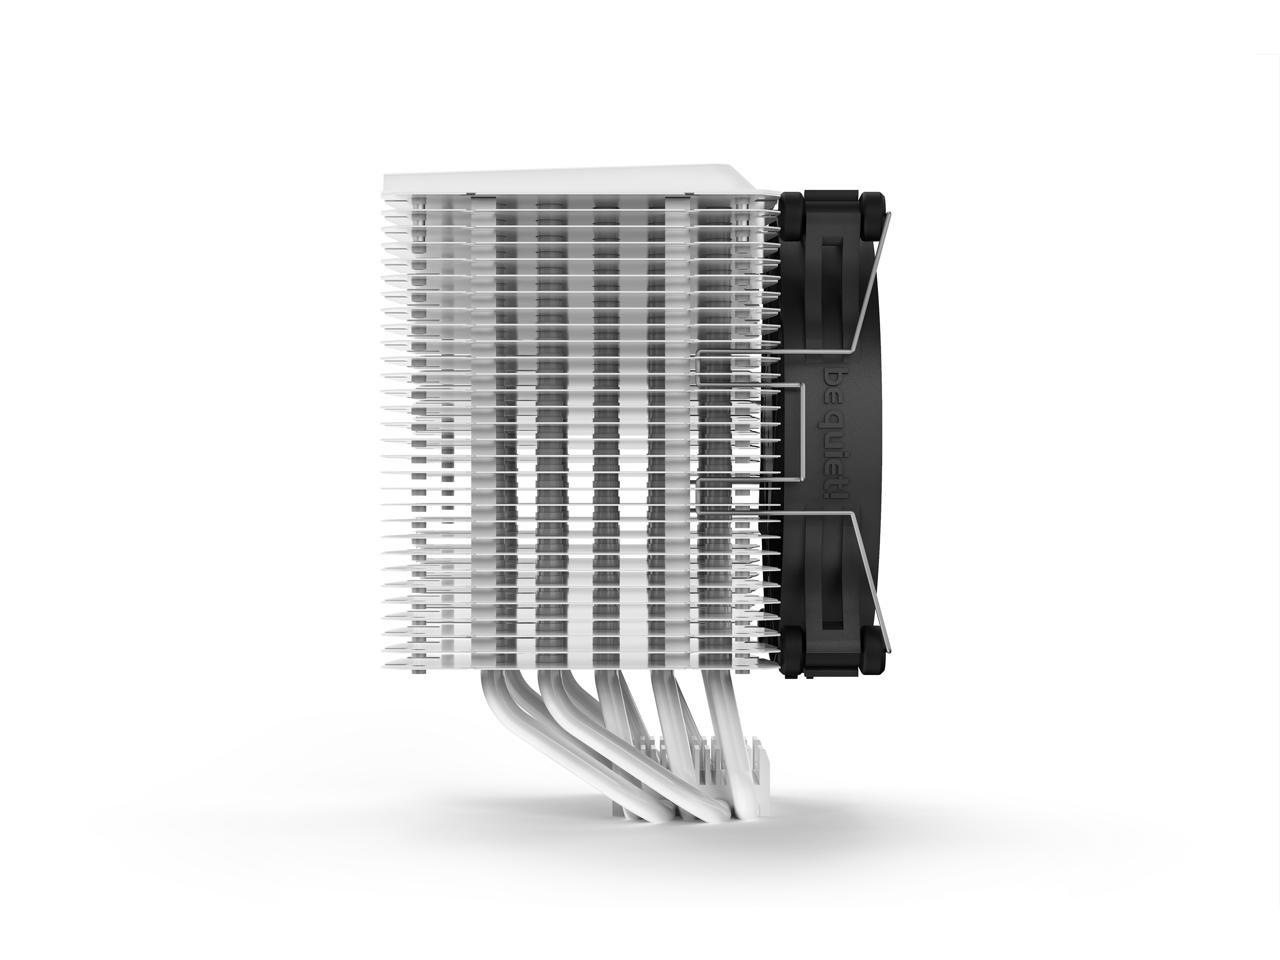 be quiet! Shadow Rock 3 White, CPU cooler, 190W TDP, decoupled silent Shadow Wings 2 120mm PWM high-speed fan, asymmetrical construction avoids blocking memory slots